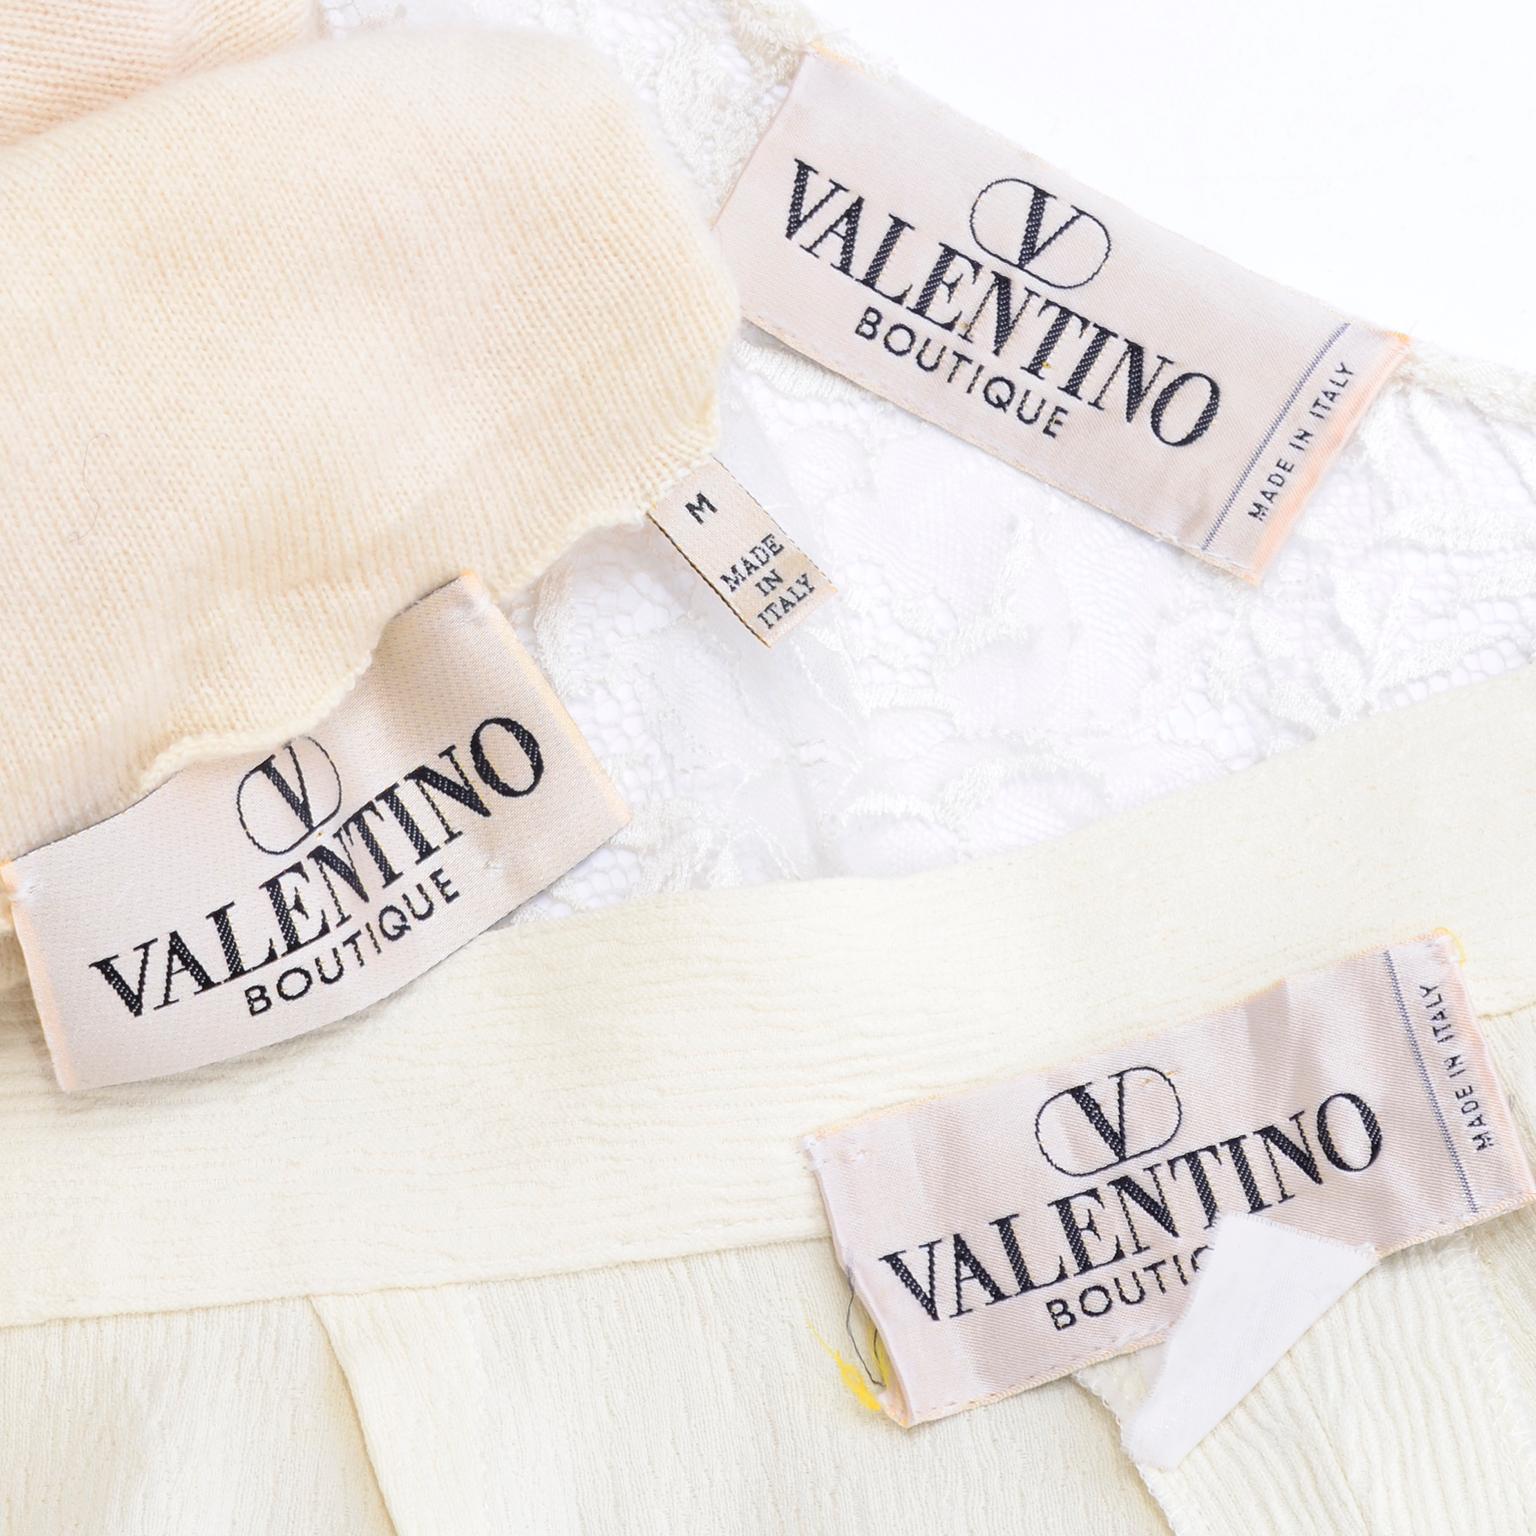 Valentino Cream Cashmere Sweater Ivory Lace Wrap Top & Textured High Waist Pants 11